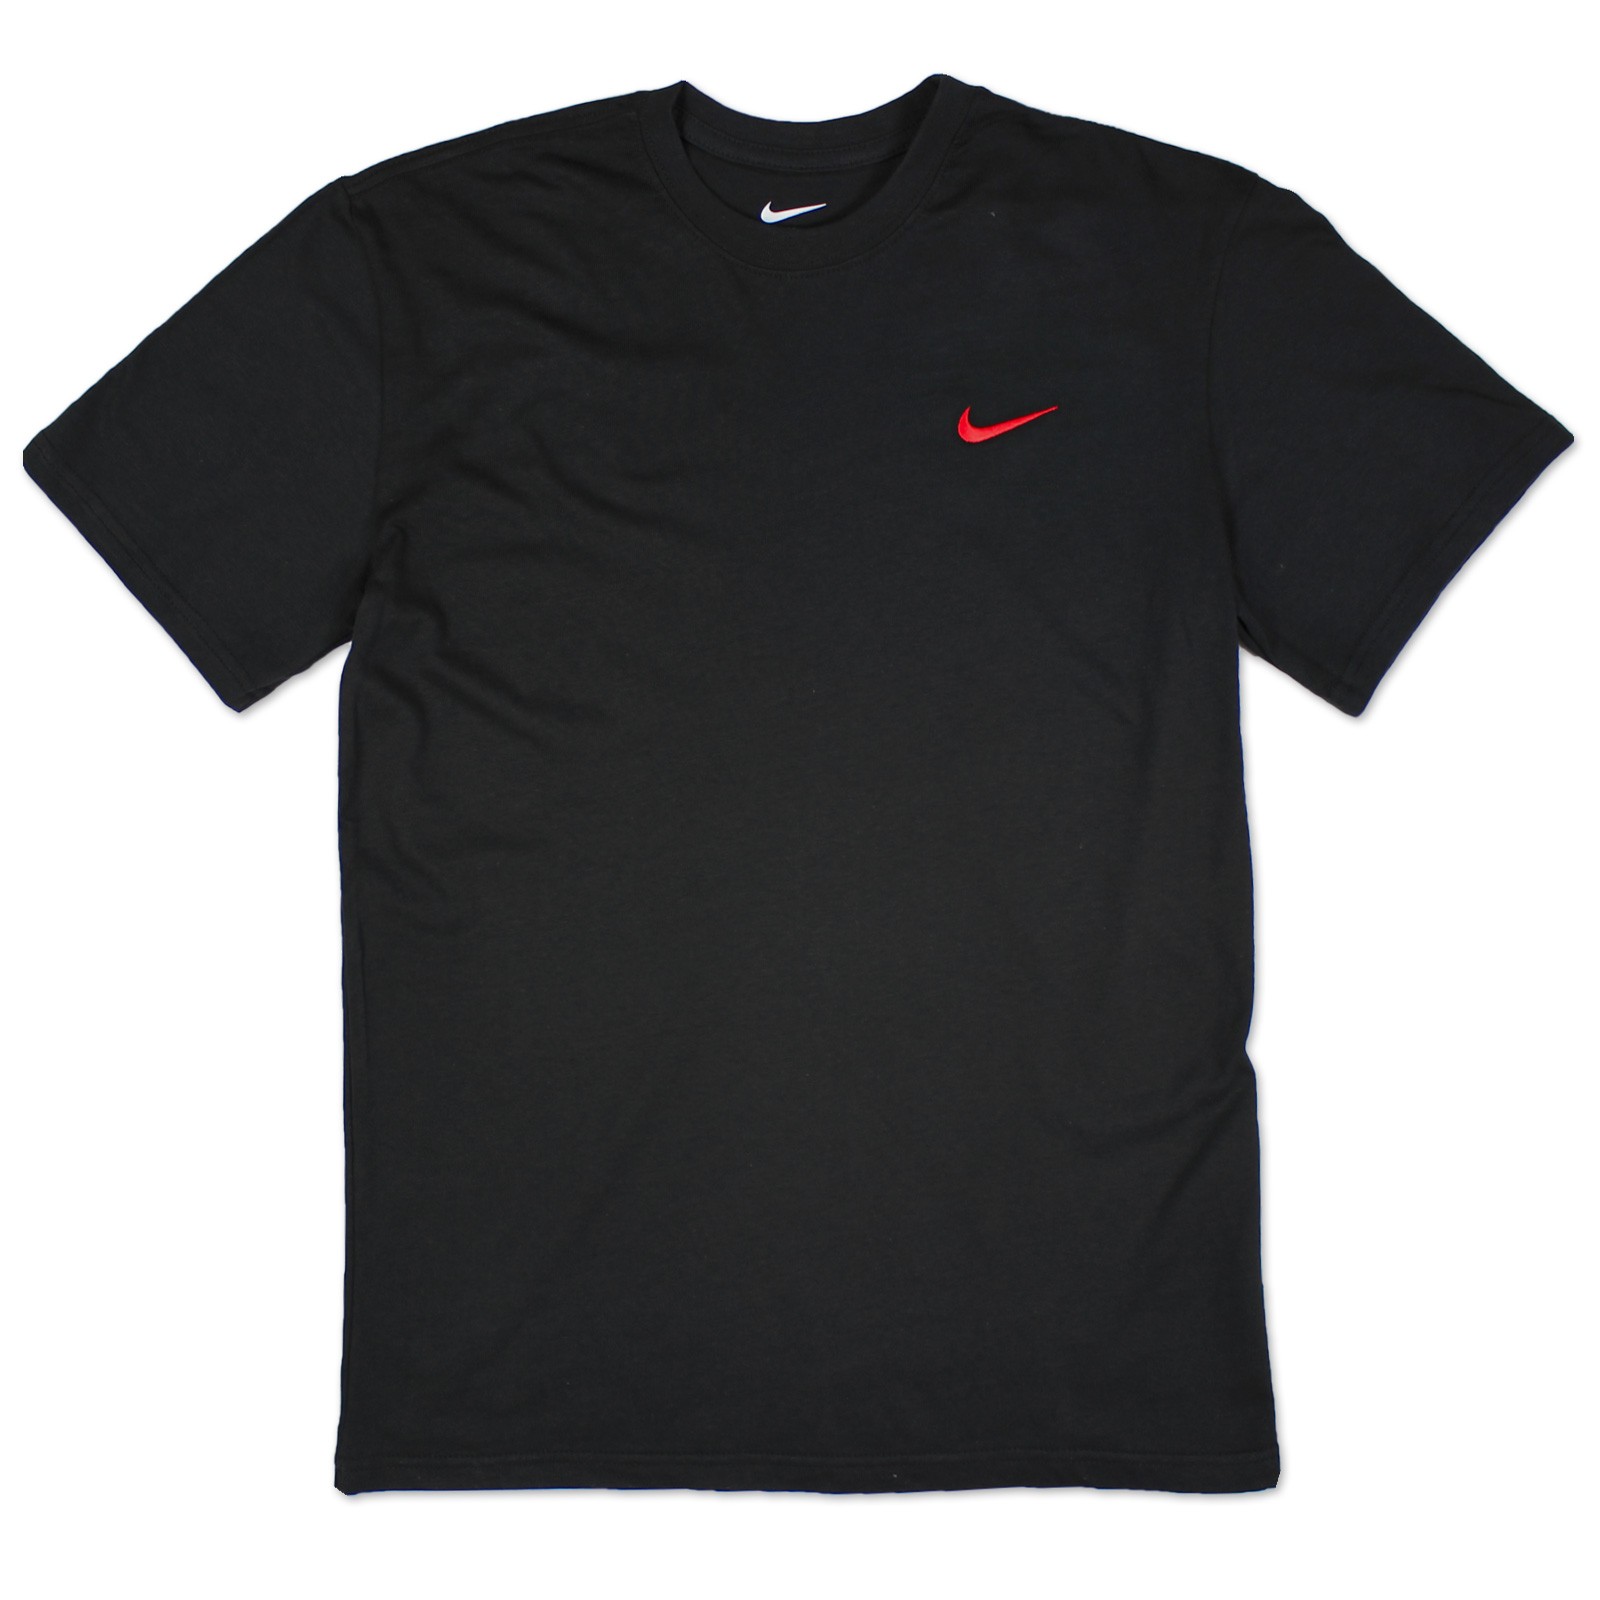 red and black shirt nike